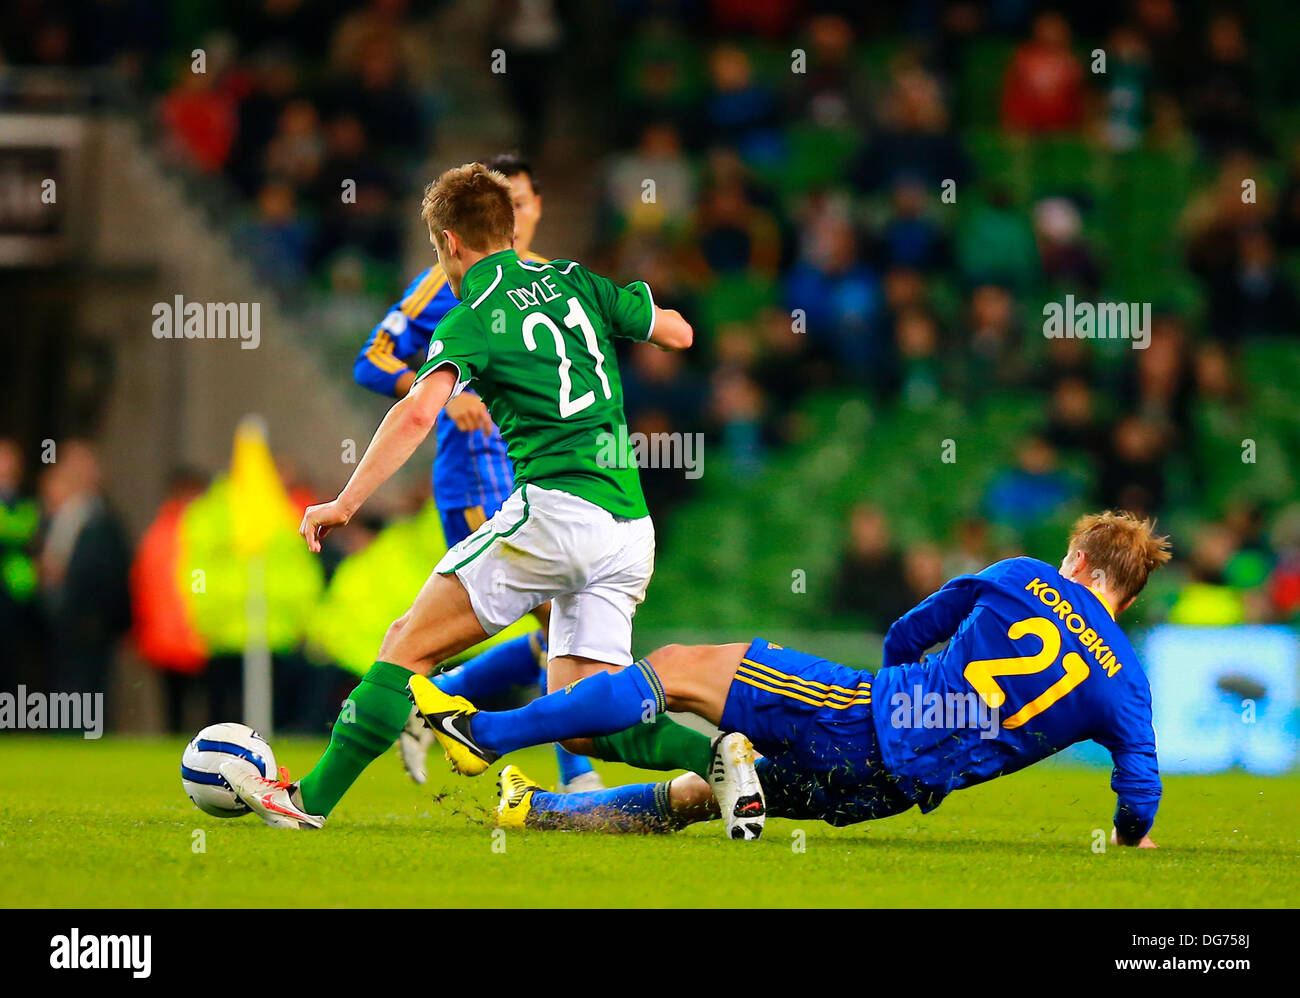 Dublin, Ireland. 15th Oct, 2013. Valeriy Korobkin (Kazakhstan) slides in  with a two footed challenge on Kevin Doyle (Rep of Ireland) during the  World Cup Qualifier between Republic of Ireland and Kazakhstan